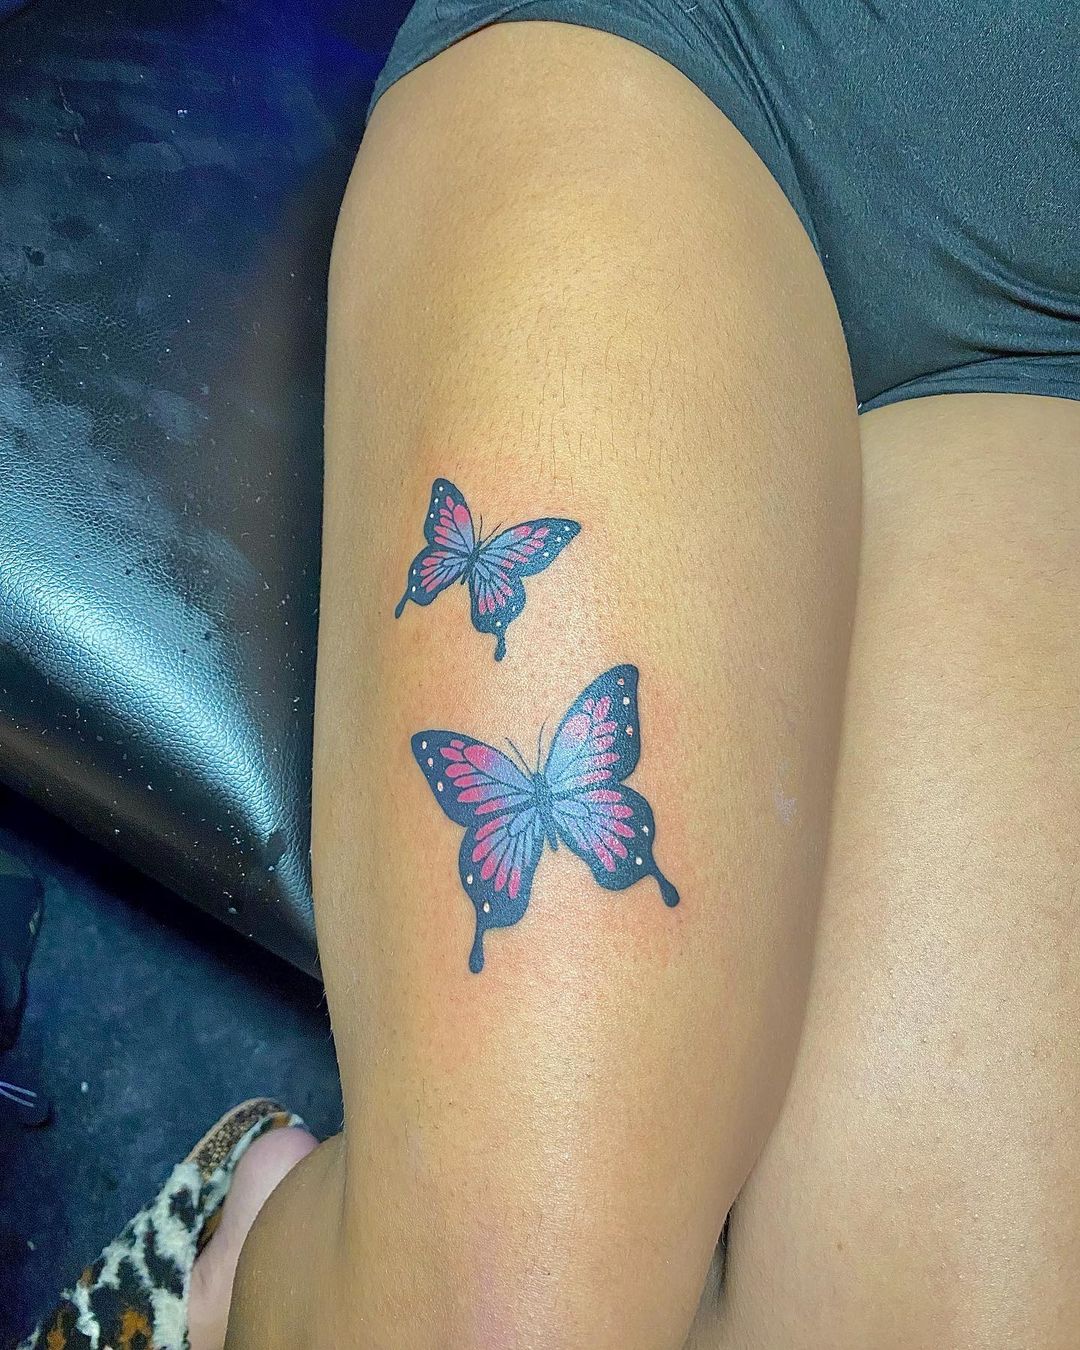 30+ Best Butterfly Tattoos Design You’ll Love To Get Next. Butterfly Tattoo on Thigh